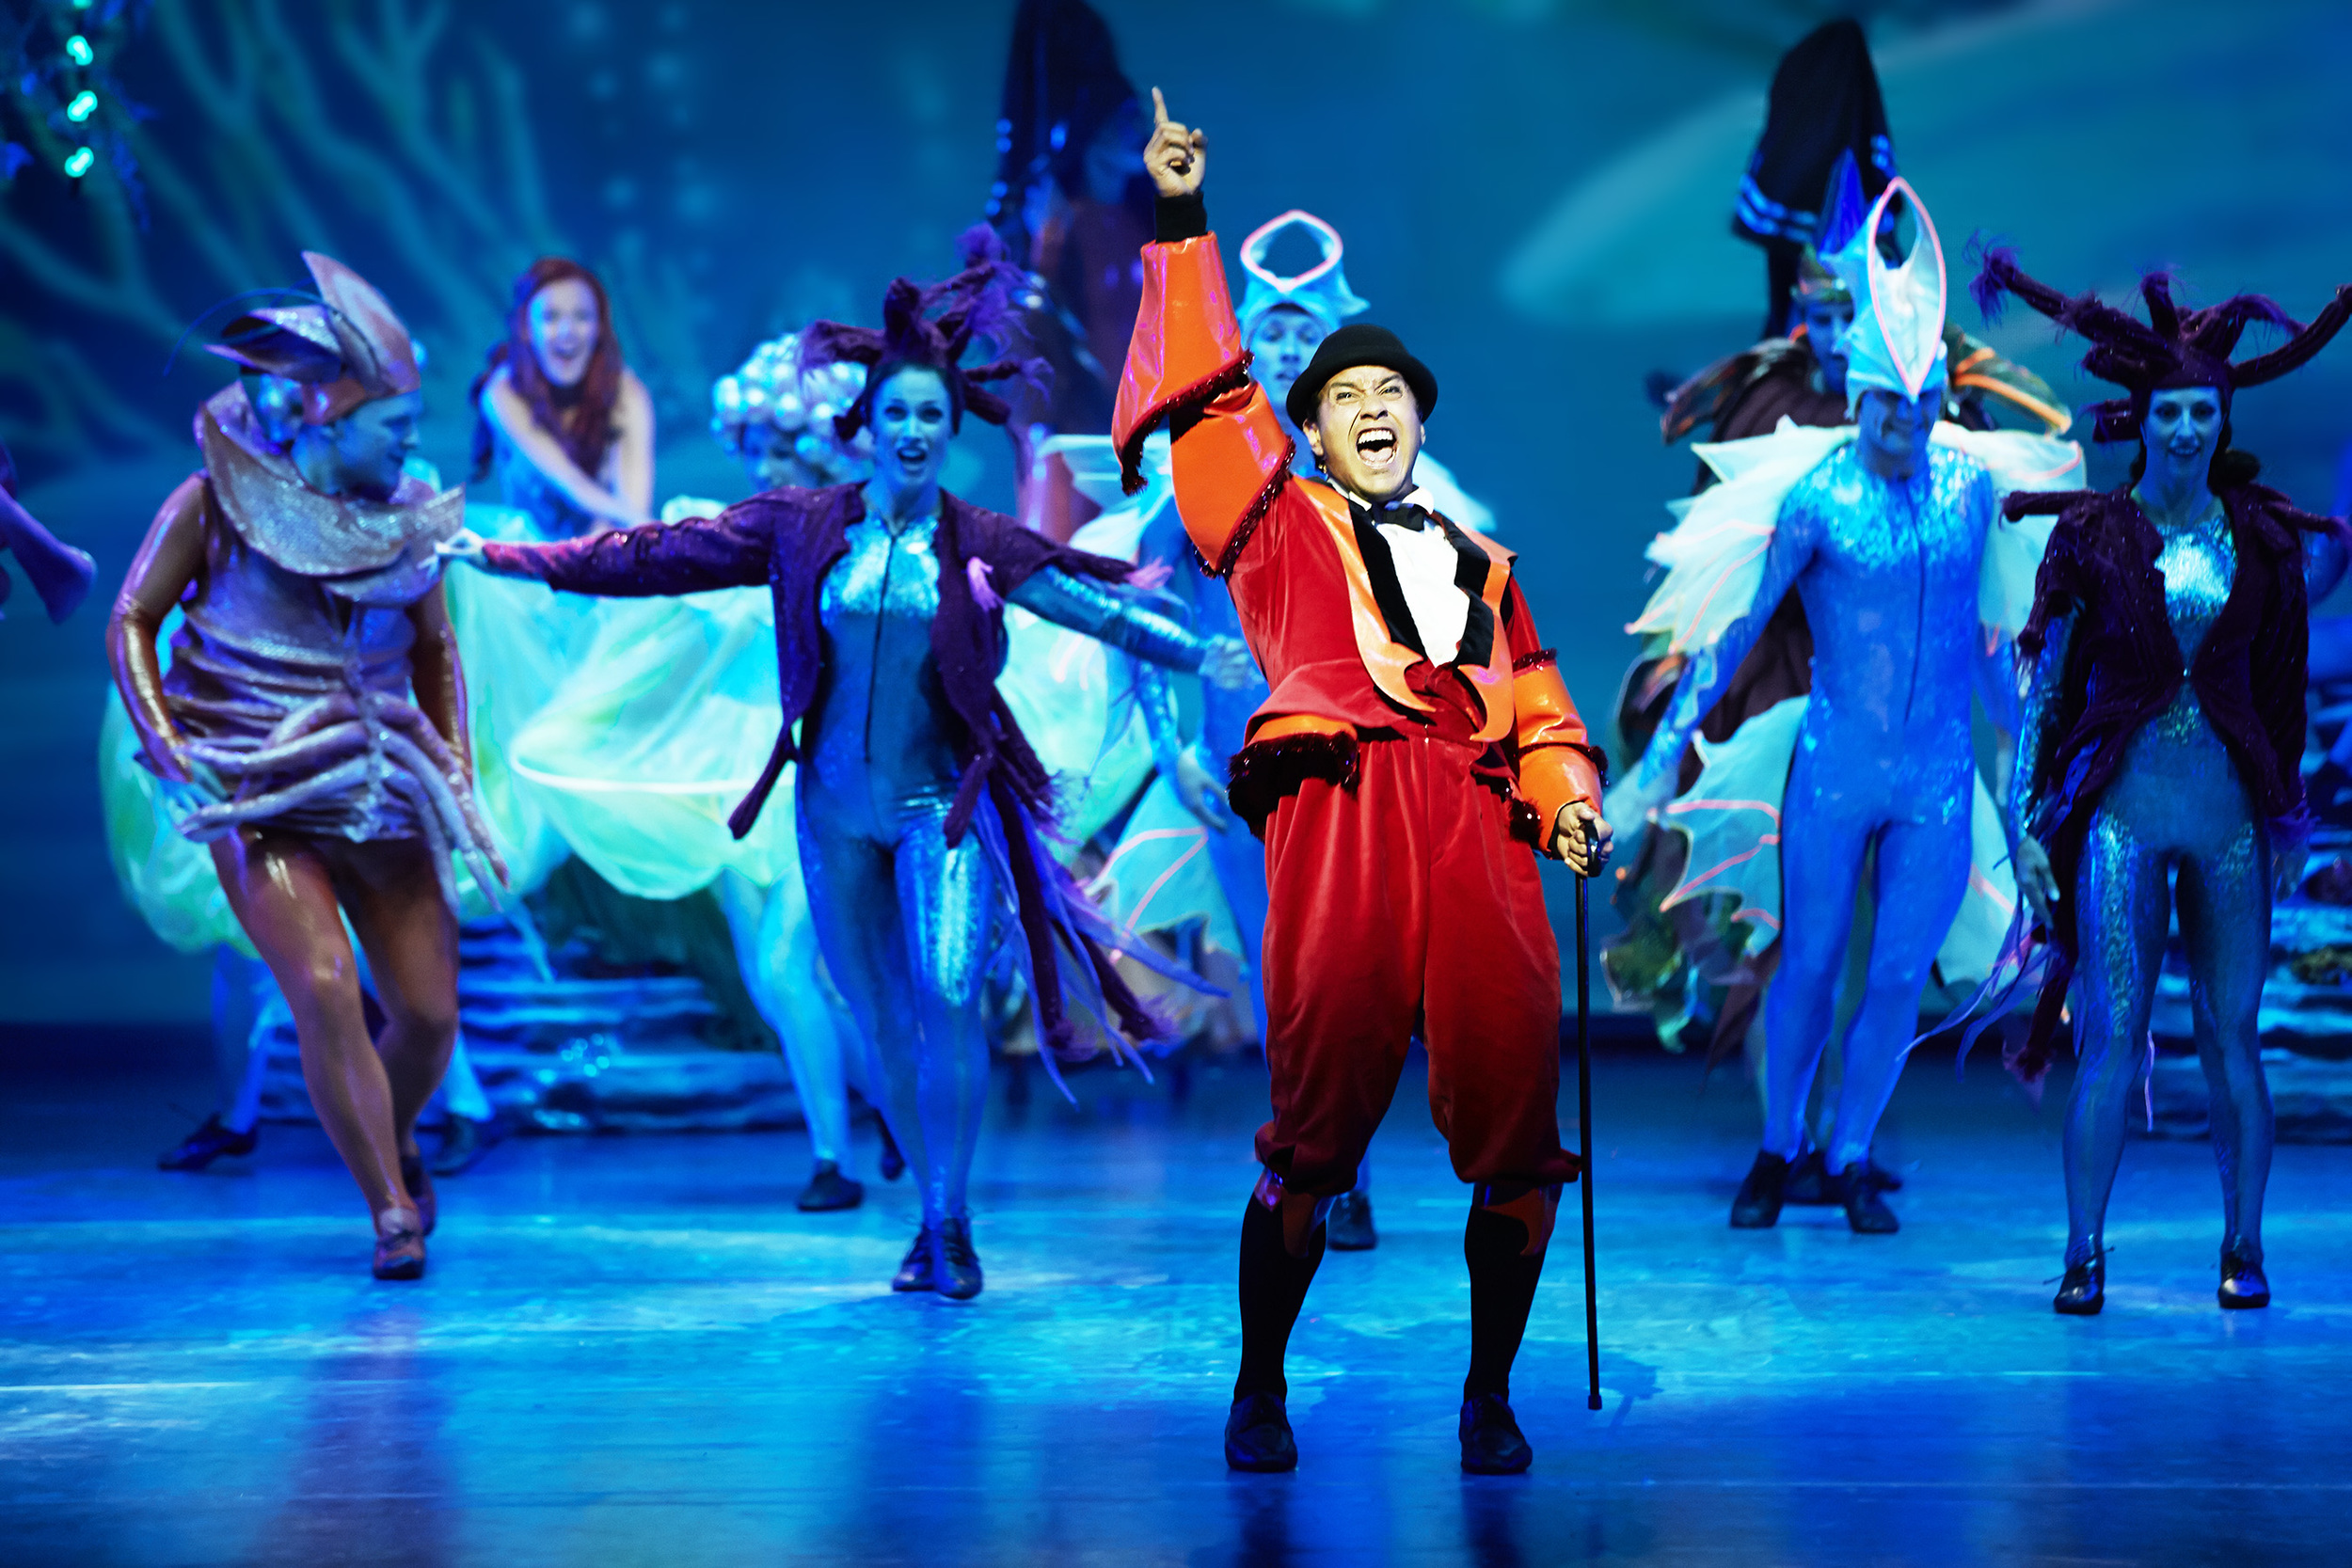  The Little Mermaid - Disney, Fredericia Theater   